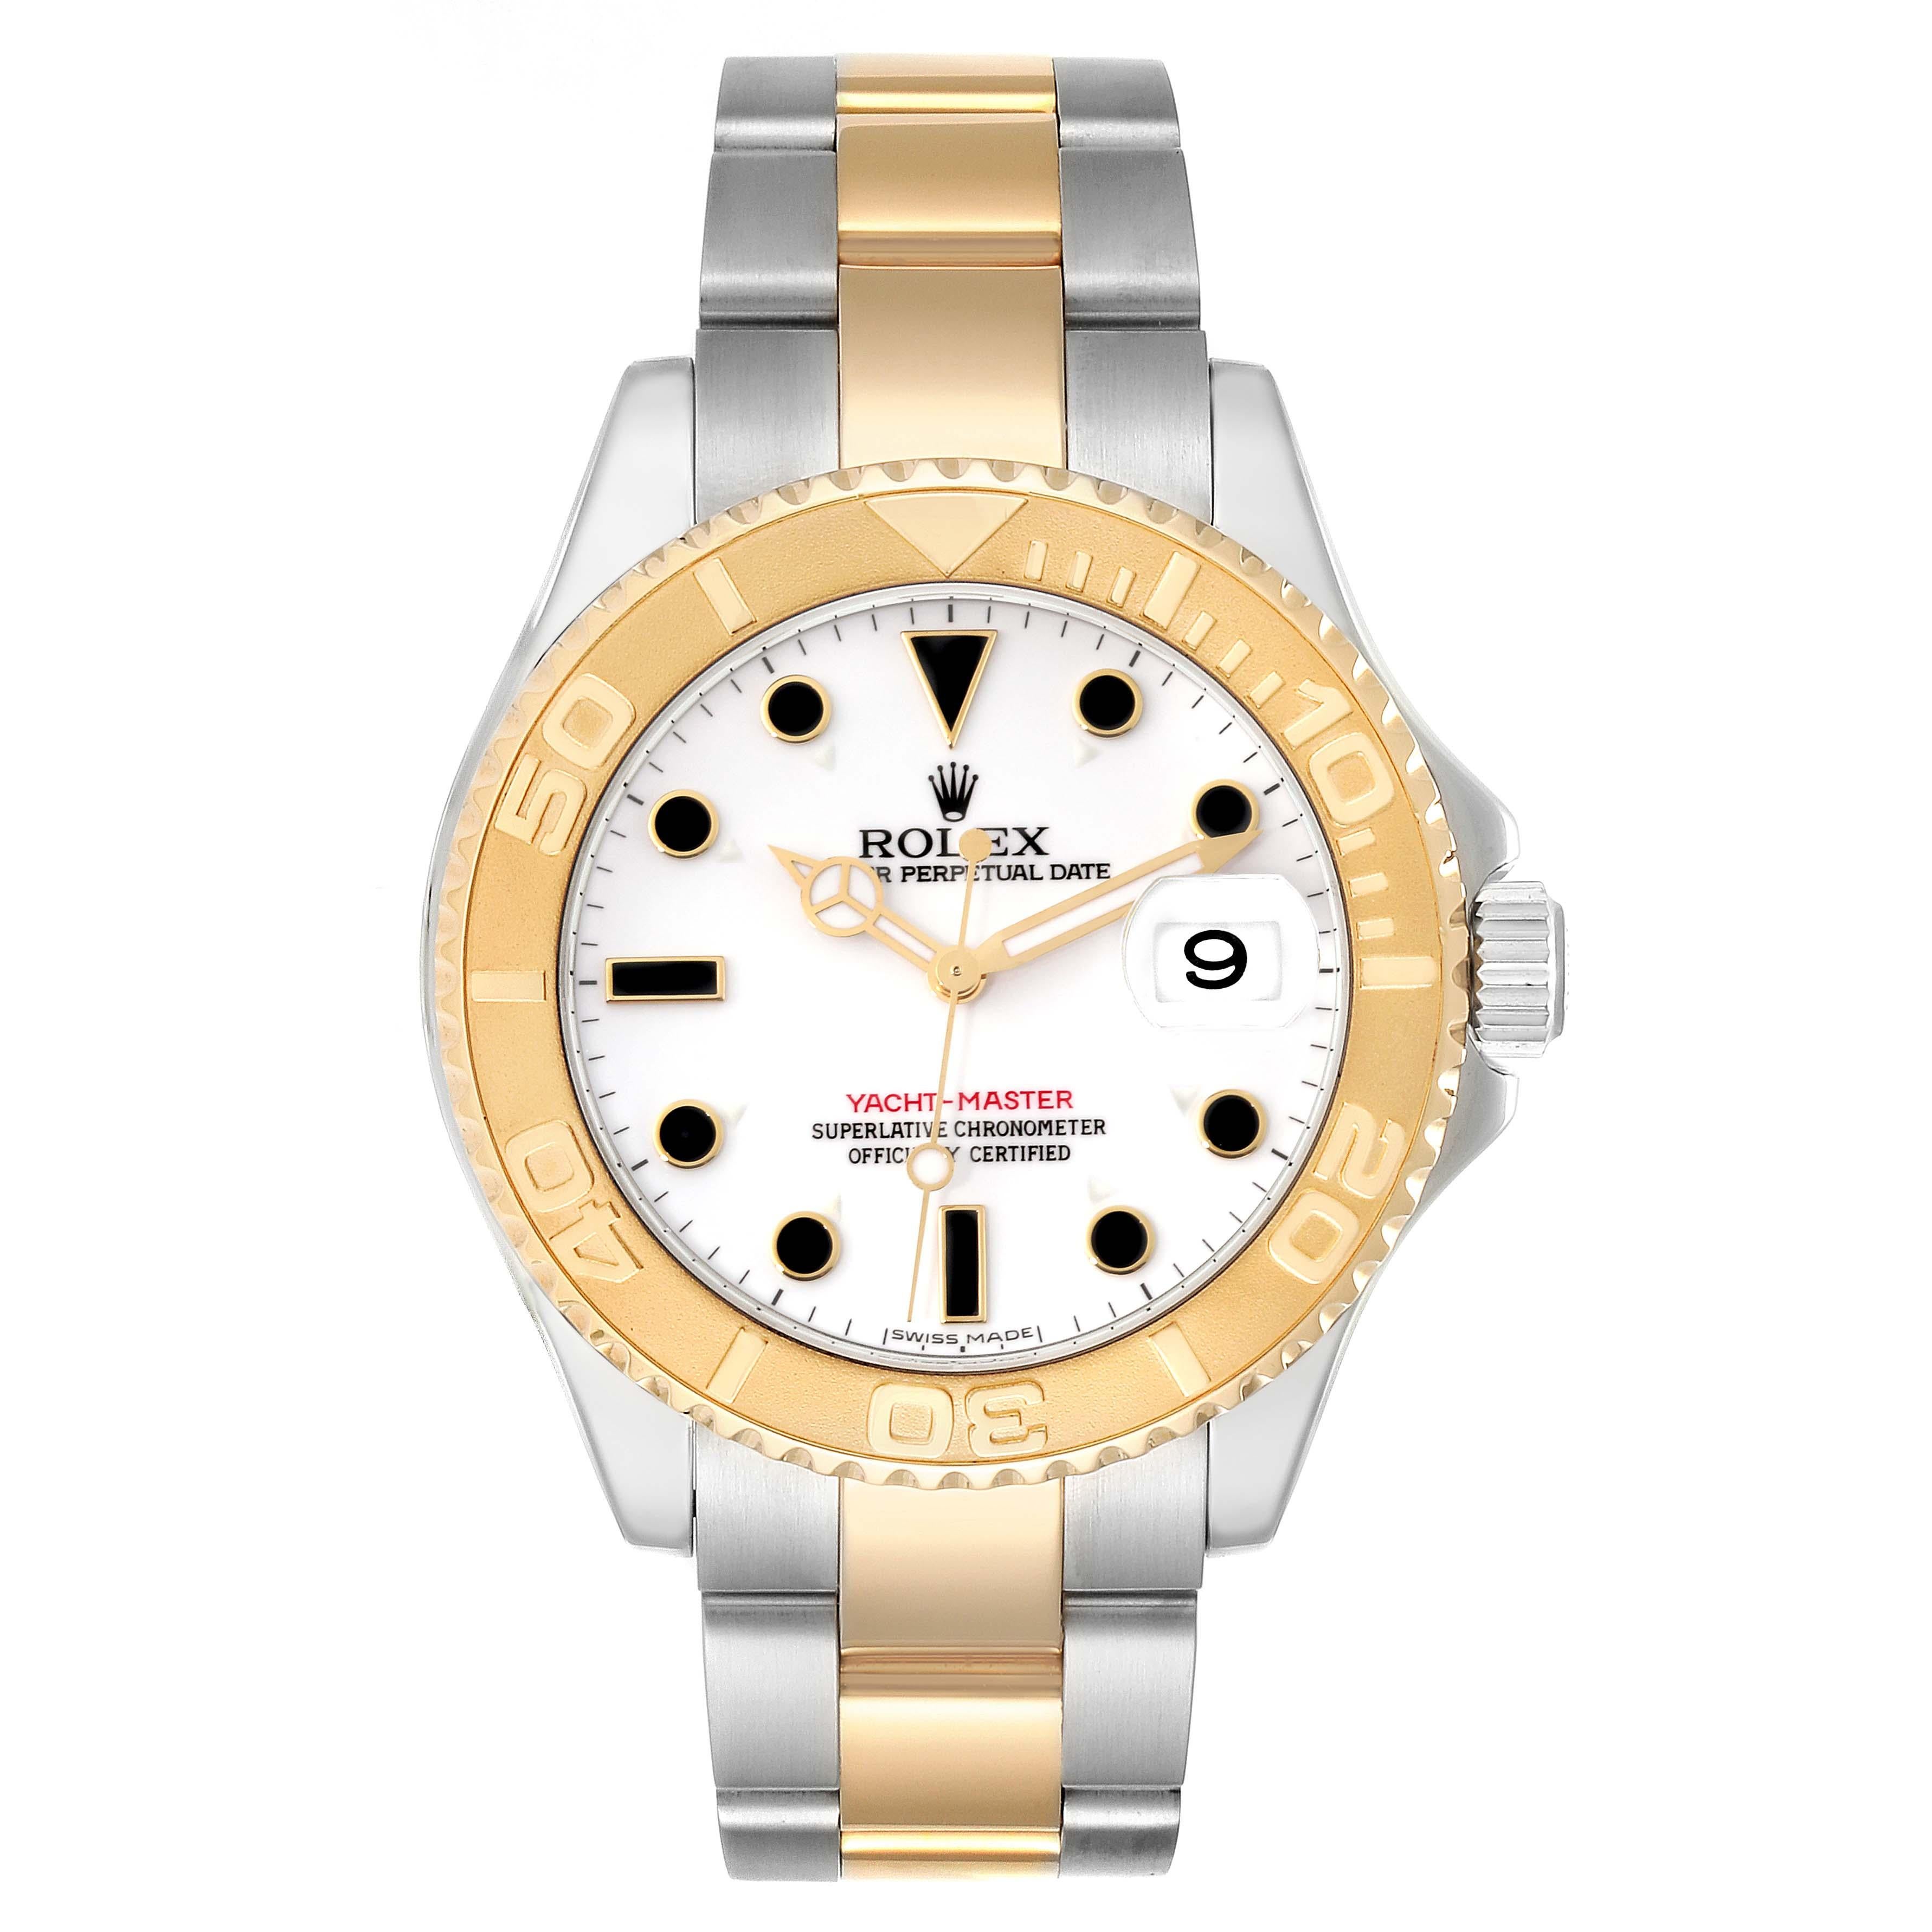 Rolex Yachtmaster Steel Yellow Gold White Dial Mens Watch 16623 Box Card. Officially certified chronometer automatic self-winding movement. Stainless steel case 40.0 mm in diameter. Rolex logo on the crown. 18k yellow gold special time-lapse